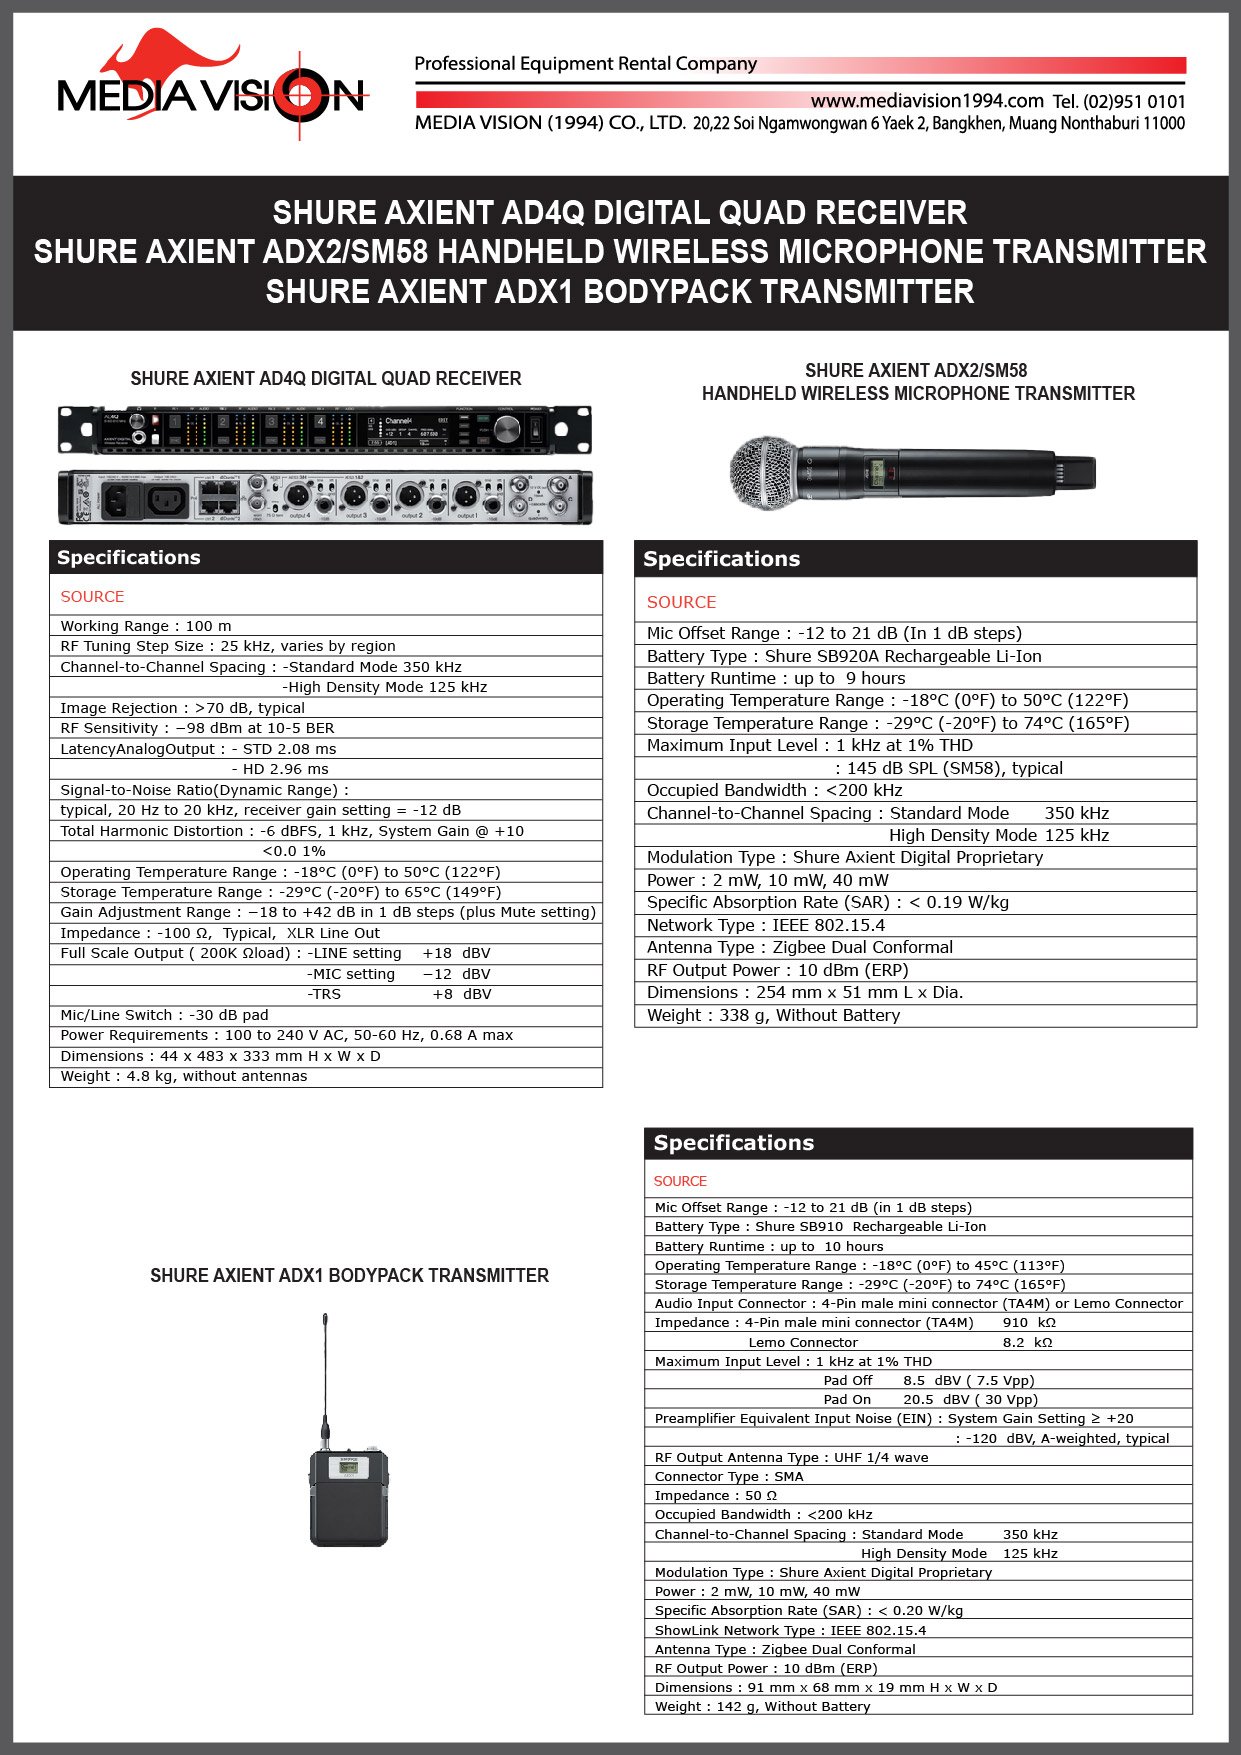 SHURE AXIENT  AD4Q DIGITAL QUAD RECEIVER , SHURE AXIENT ADX2/SM58 HANDHELD WIRELESS MICROPHONE TRANSMITTER , SHURE AXIENT ADX1 BODYPACK TRANSMITTER